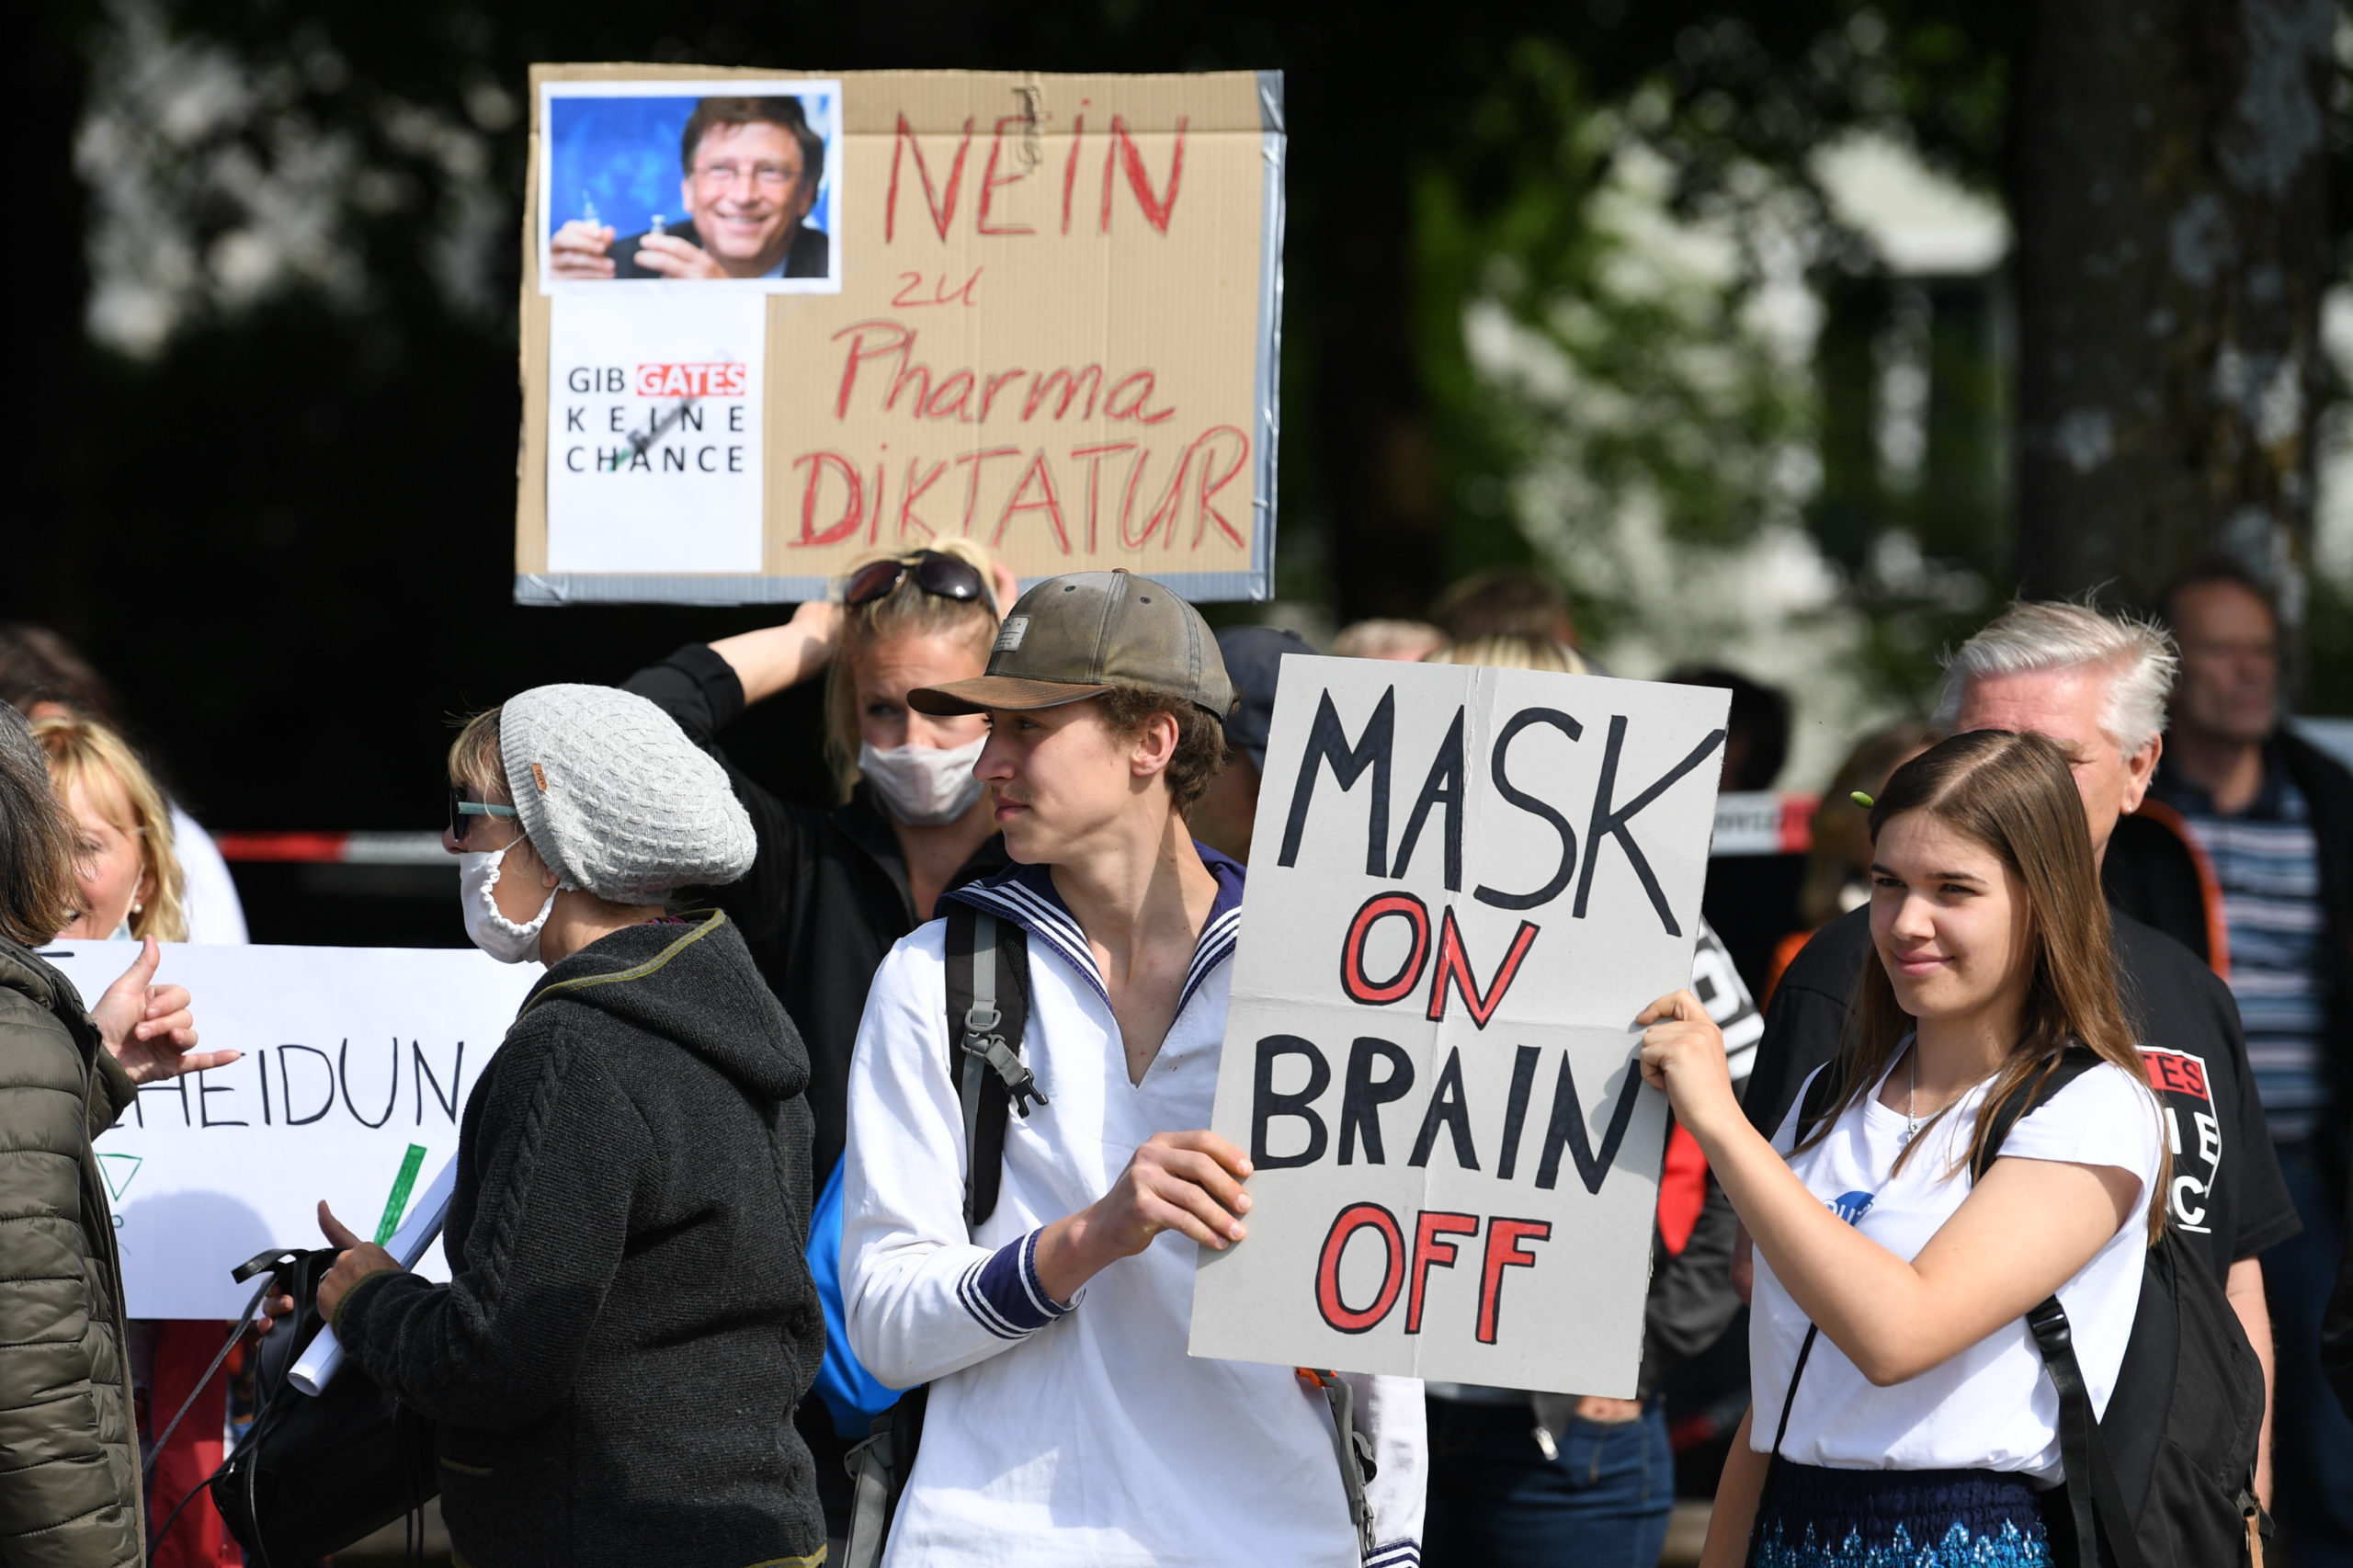 Protesters hold signs reading Mask on, brain off and I am not a conspirator, I am just a mother and Give Gates no chance during a protest of about 1000 people against lockdown measures and other government policies relating to the novel coronavirus crisis on May 16, 2020 in Munich, Germany. (Photo by Andreas Gebert/Getty Images)